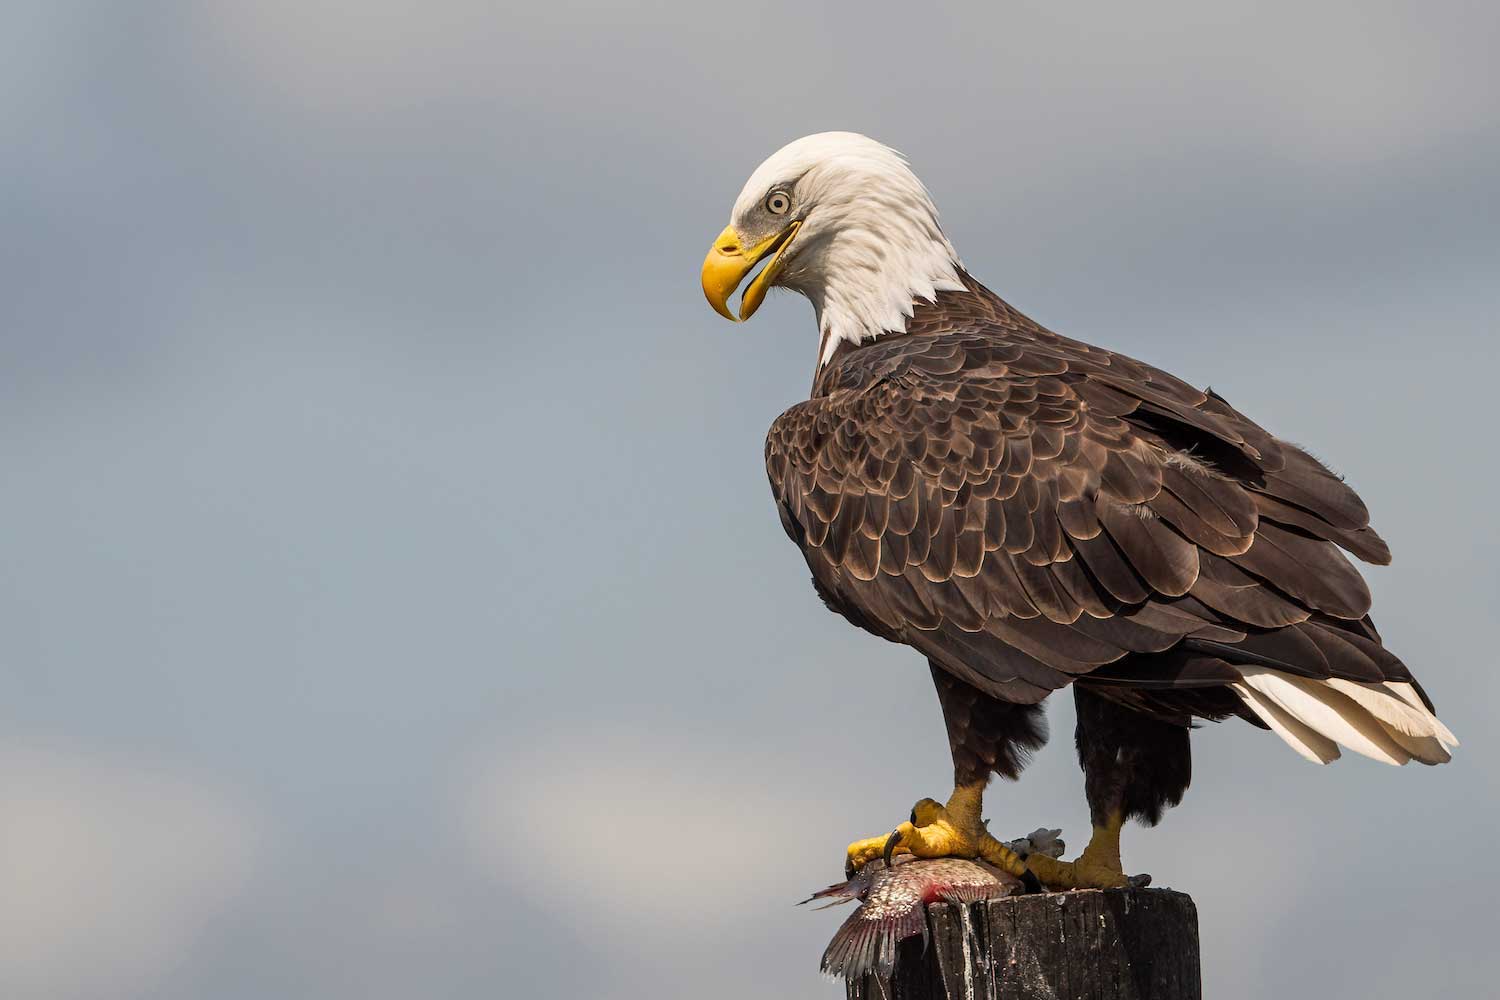 An eagle perched atop a post with a fish under its claw.